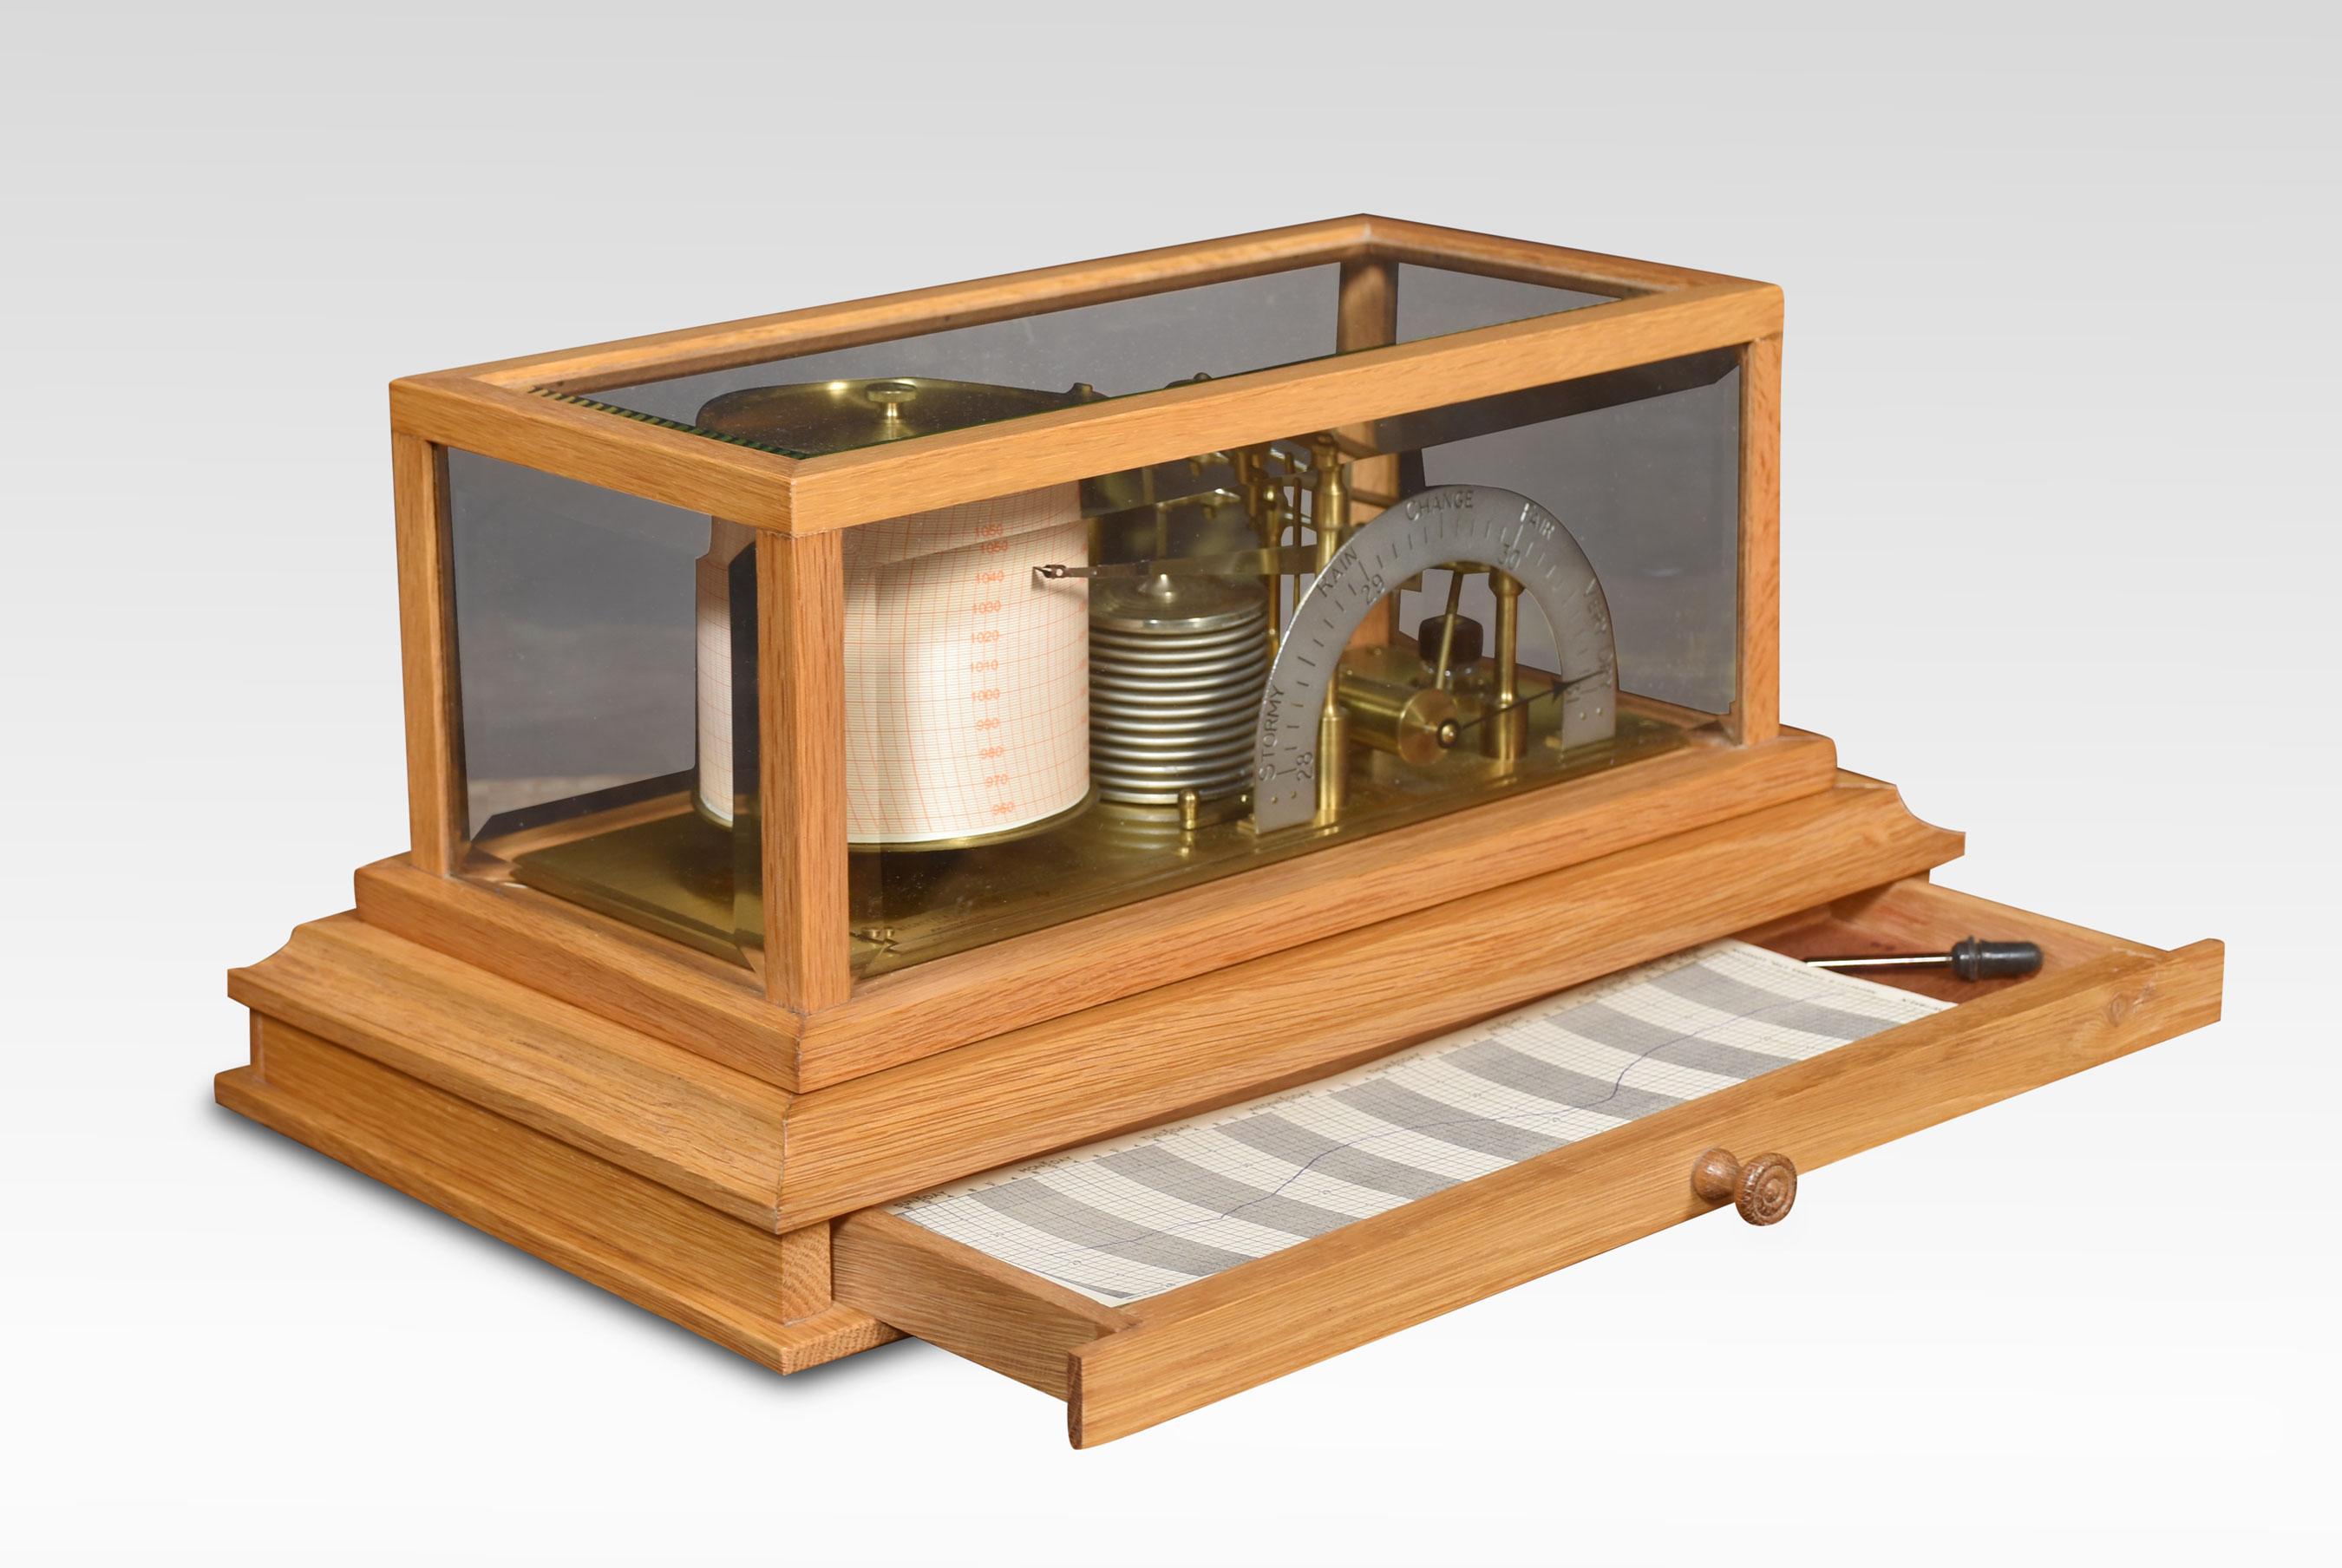 Unusual oak-cased barograph and barometer by Negretti & Zambra, having five glazed removable lid. The mechanical eight-day movement is housed in the drum, fitted with a seven-day chart that covers one full rotation of the drum. The ink trace, or